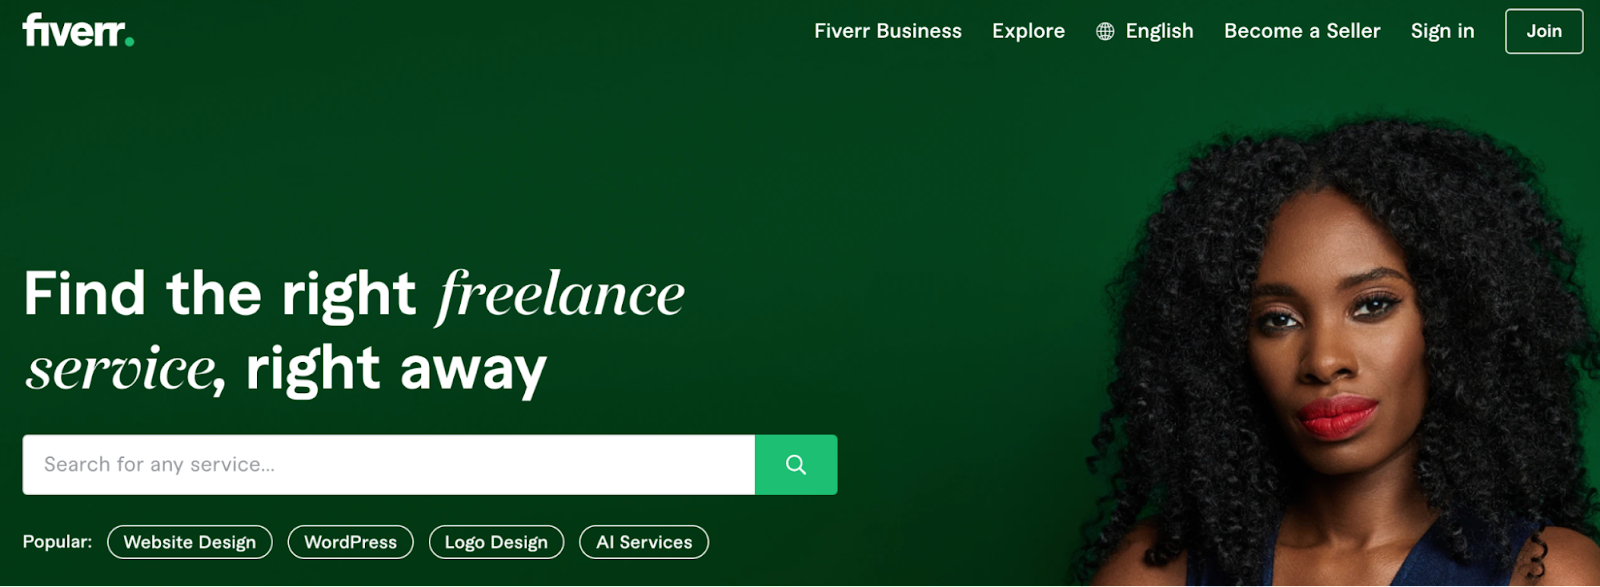 Fiver homepage with search bar for freelance jobs, an online business idea.